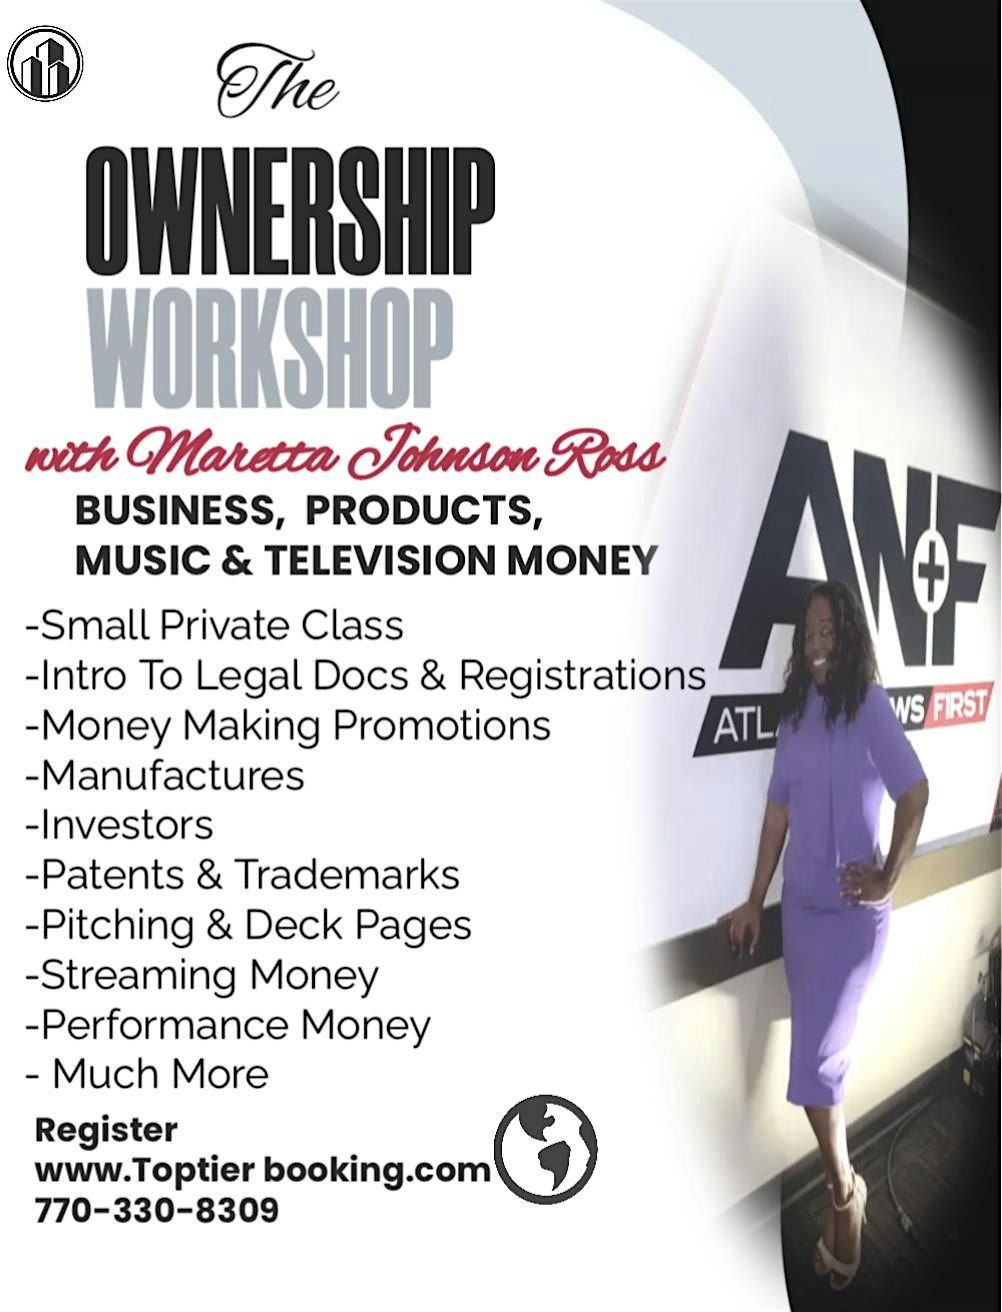 The Ownership Workshop with Maretta Johnson Ross